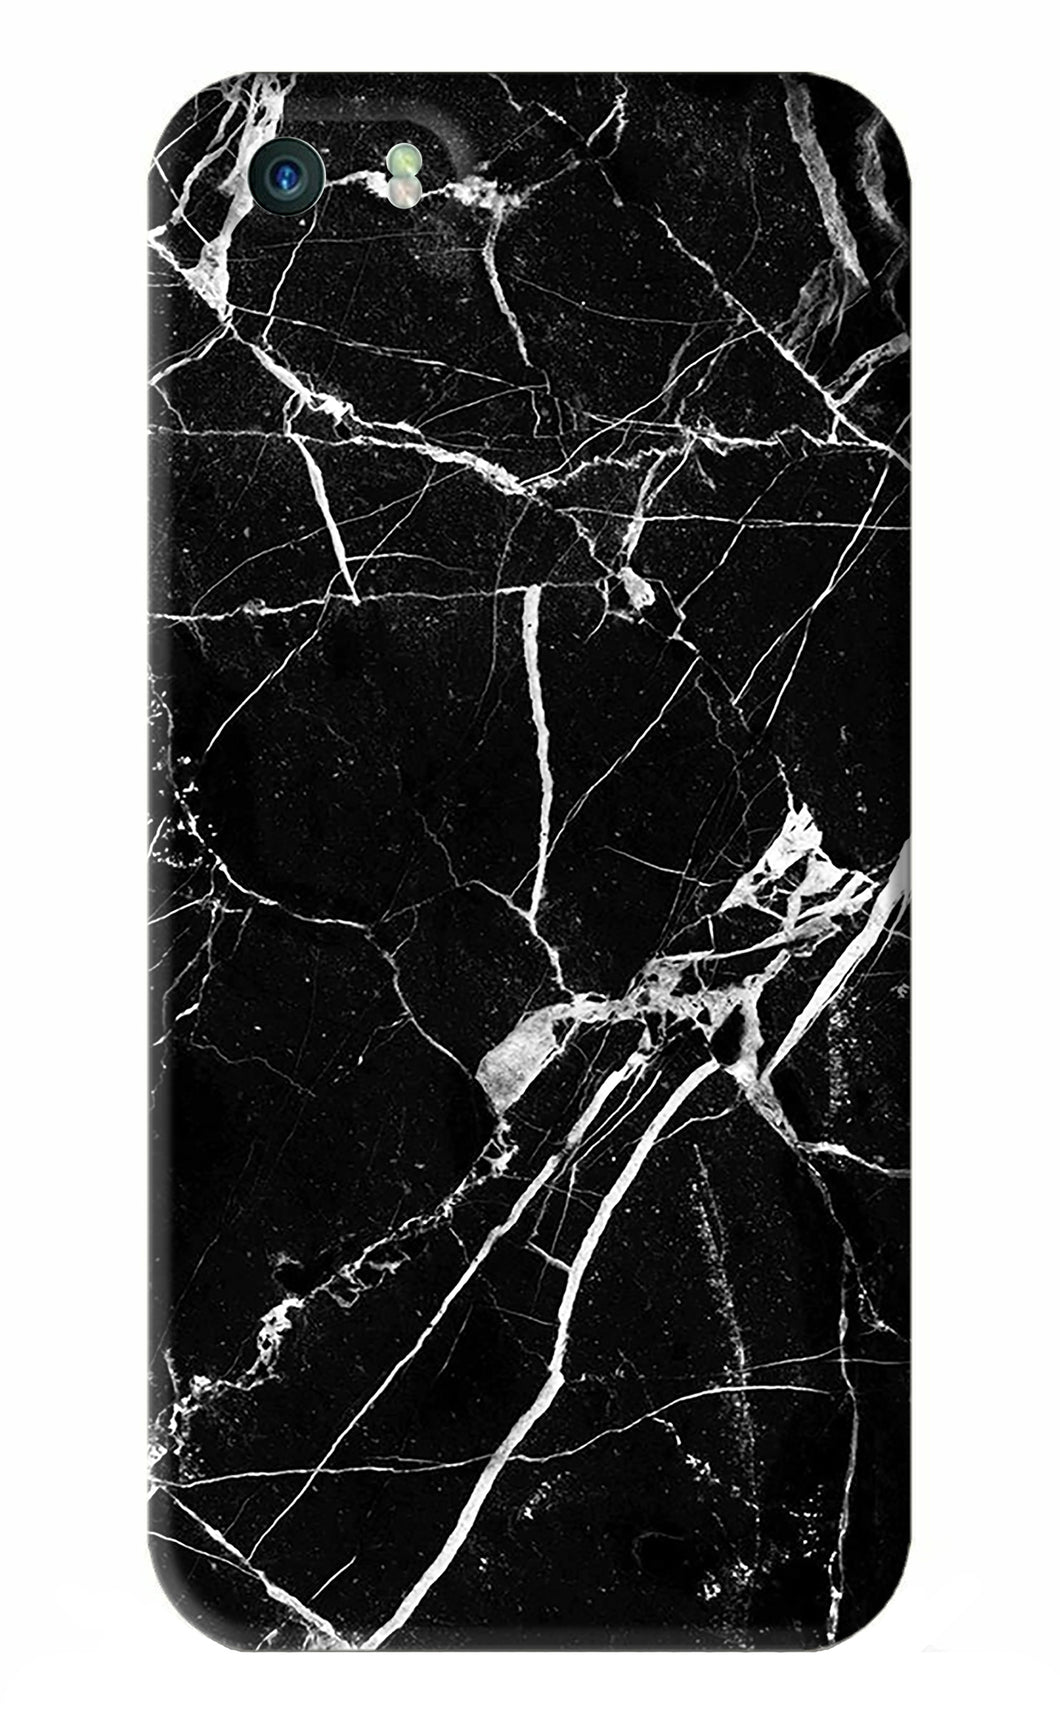 Black Marble Texture 2 iPhone 5S Back Skin Wrap